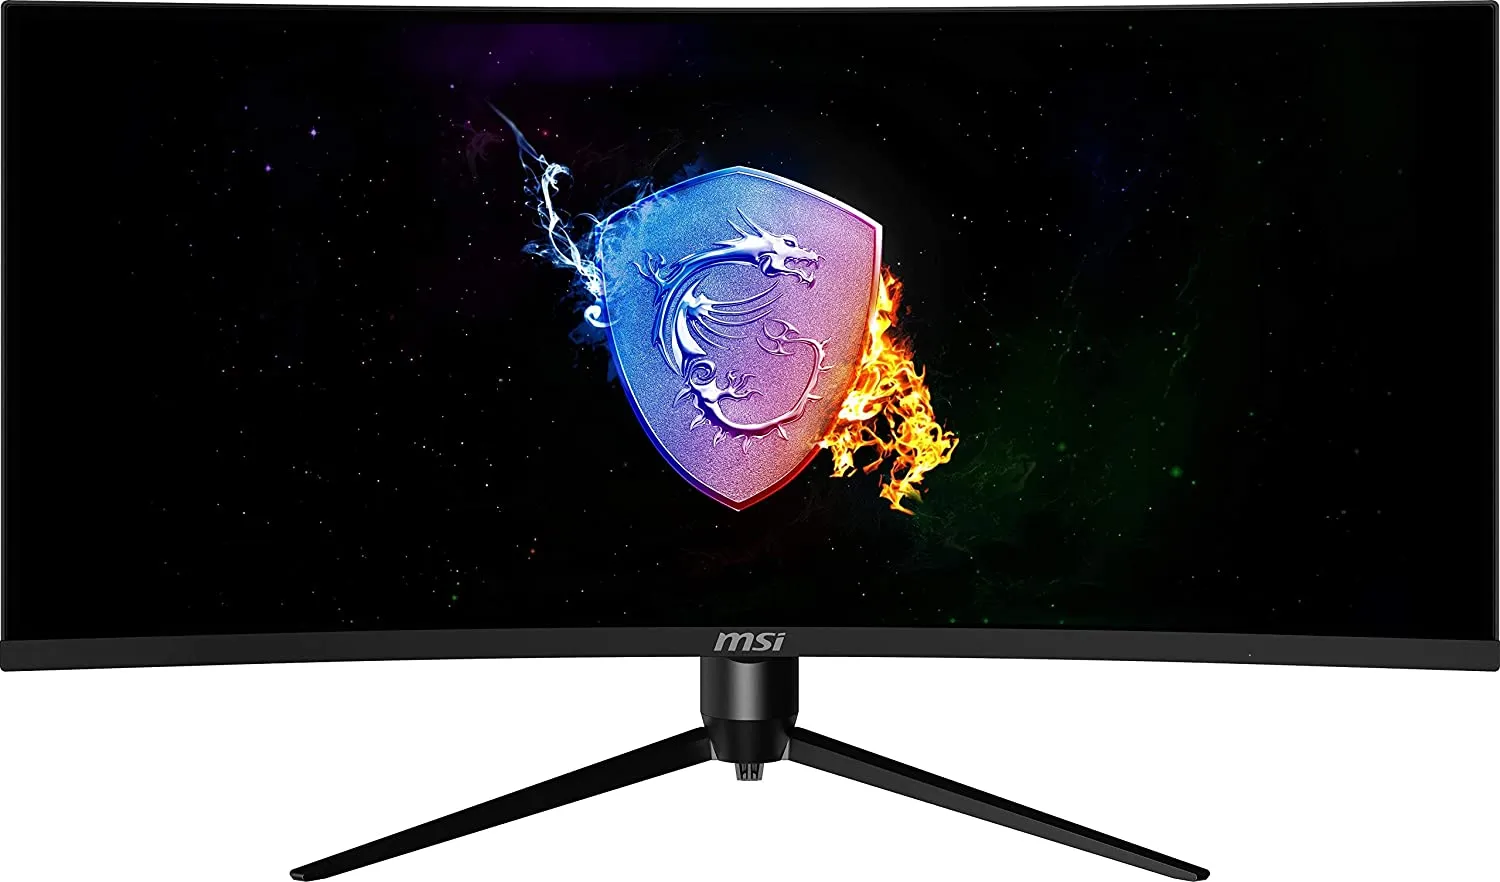 27-inch Alienware gaming monitor